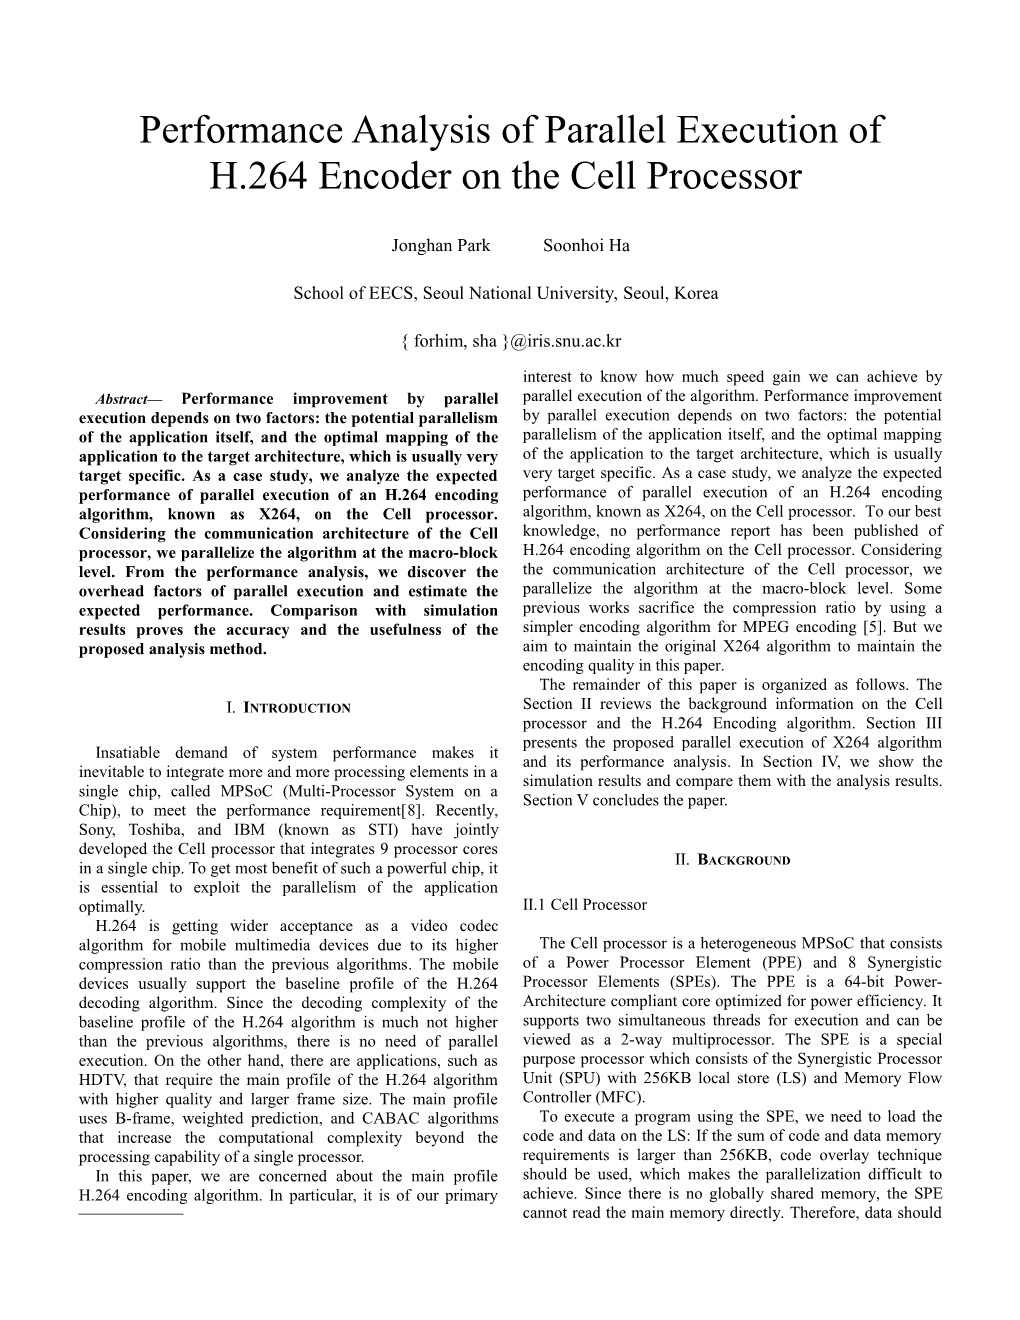 Performance Analysis of Parallel Execution of H.264 Encoder on the Cell Processor